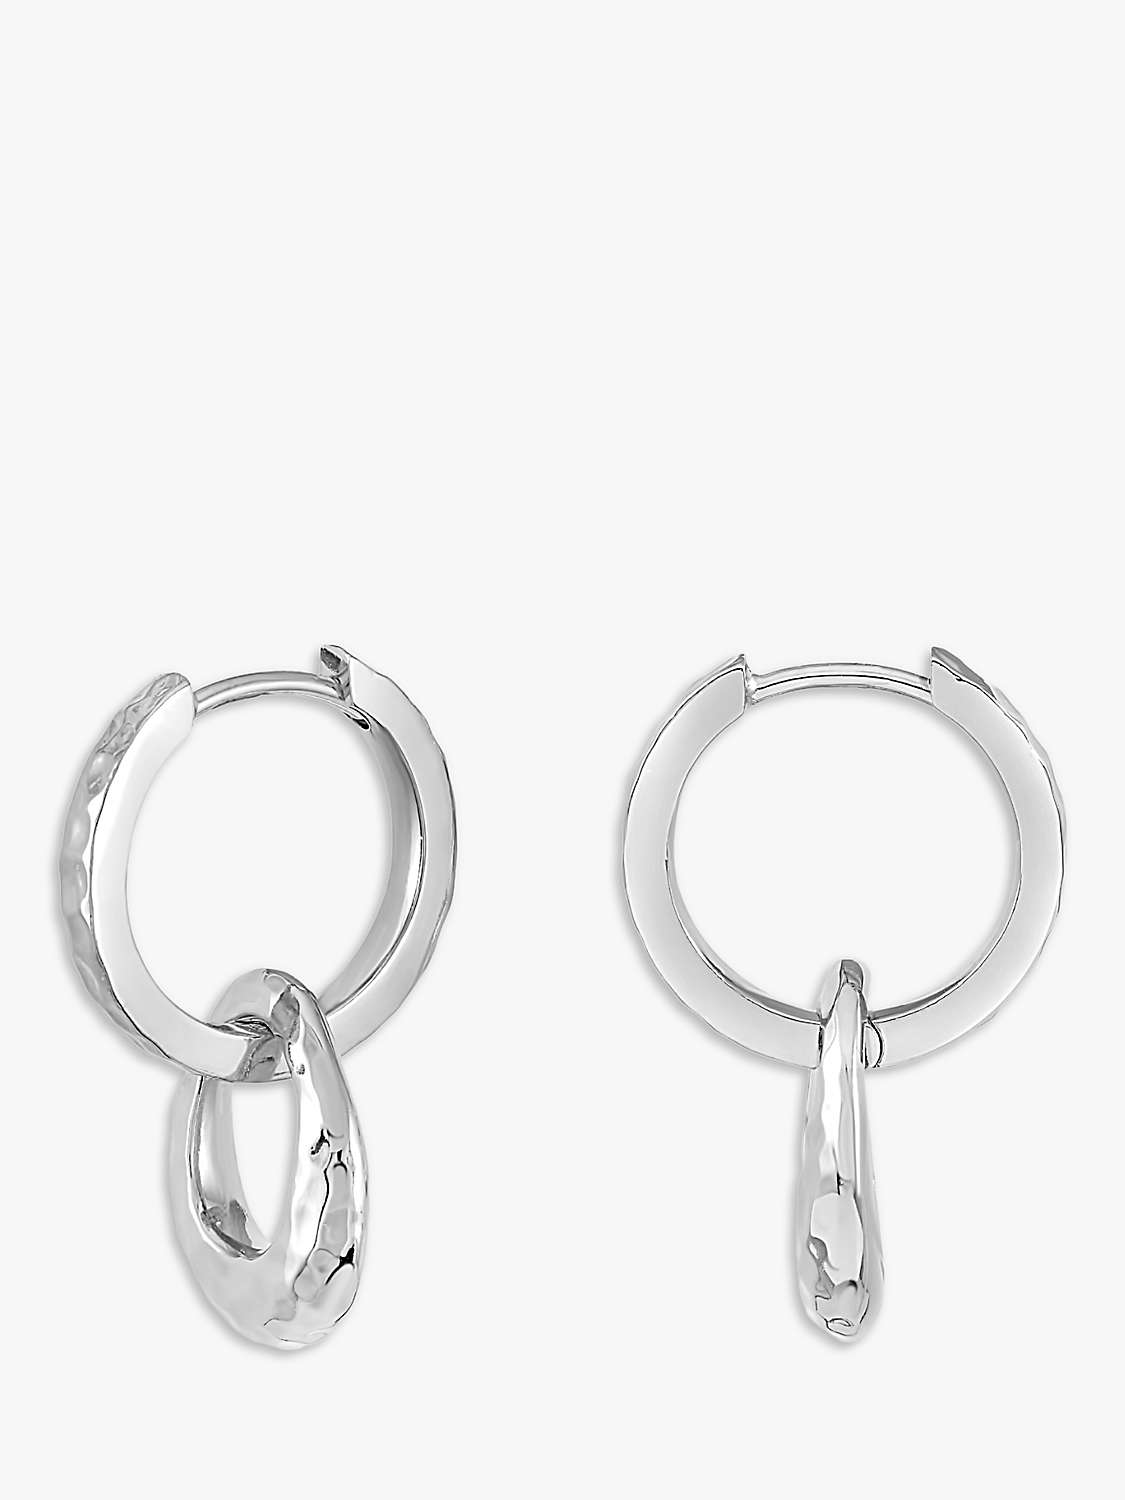 Buy Dower & Hall Entwined Oval & Huggie Hoops Online at johnlewis.com